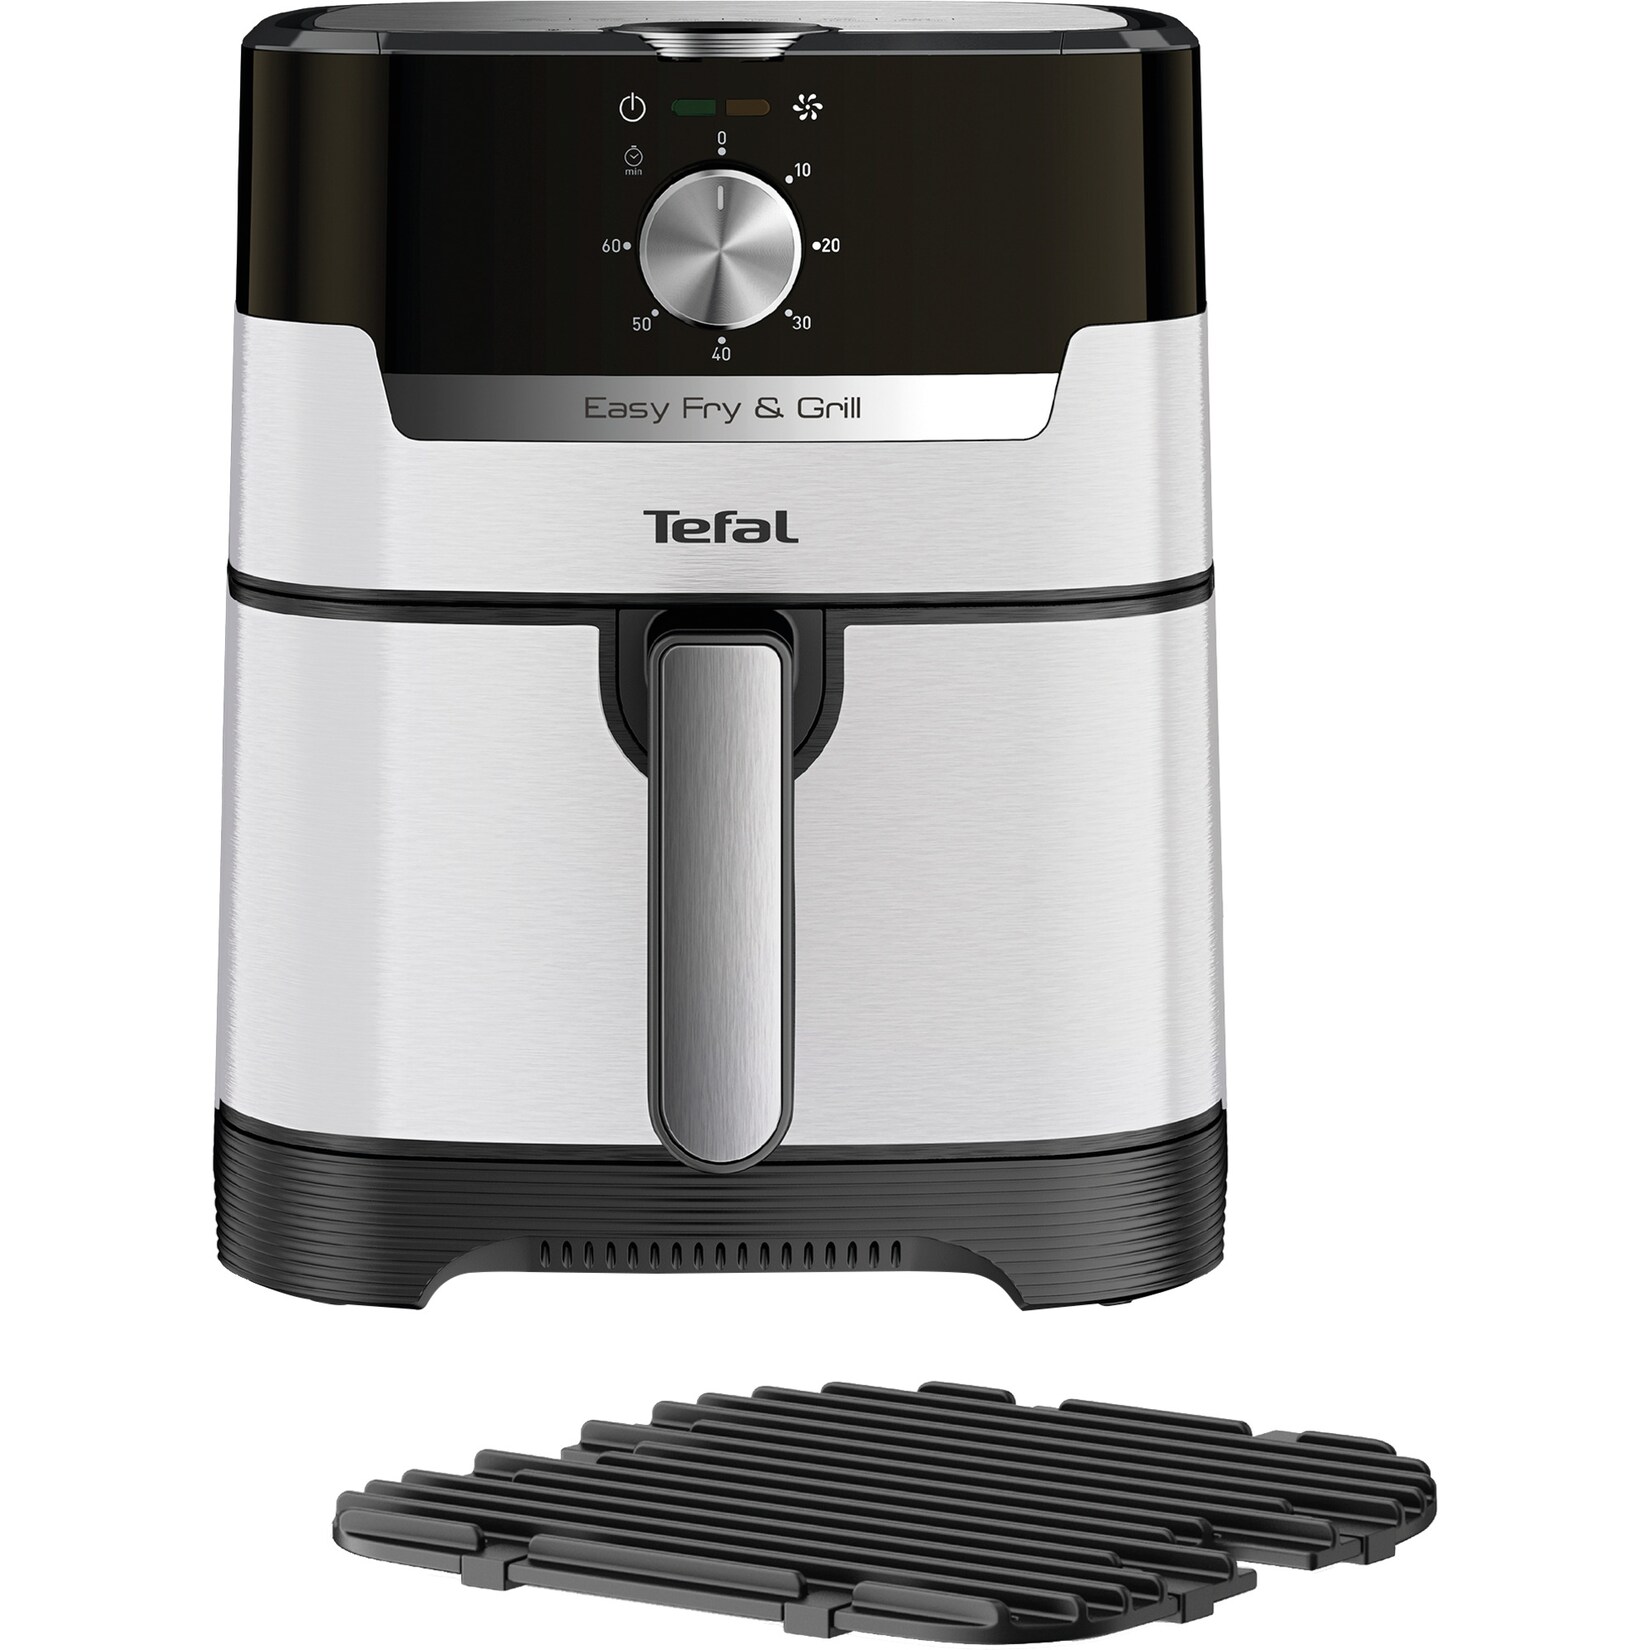 Tefal Heißluftfritteuse Easy Fry & Grill Classic EY501A